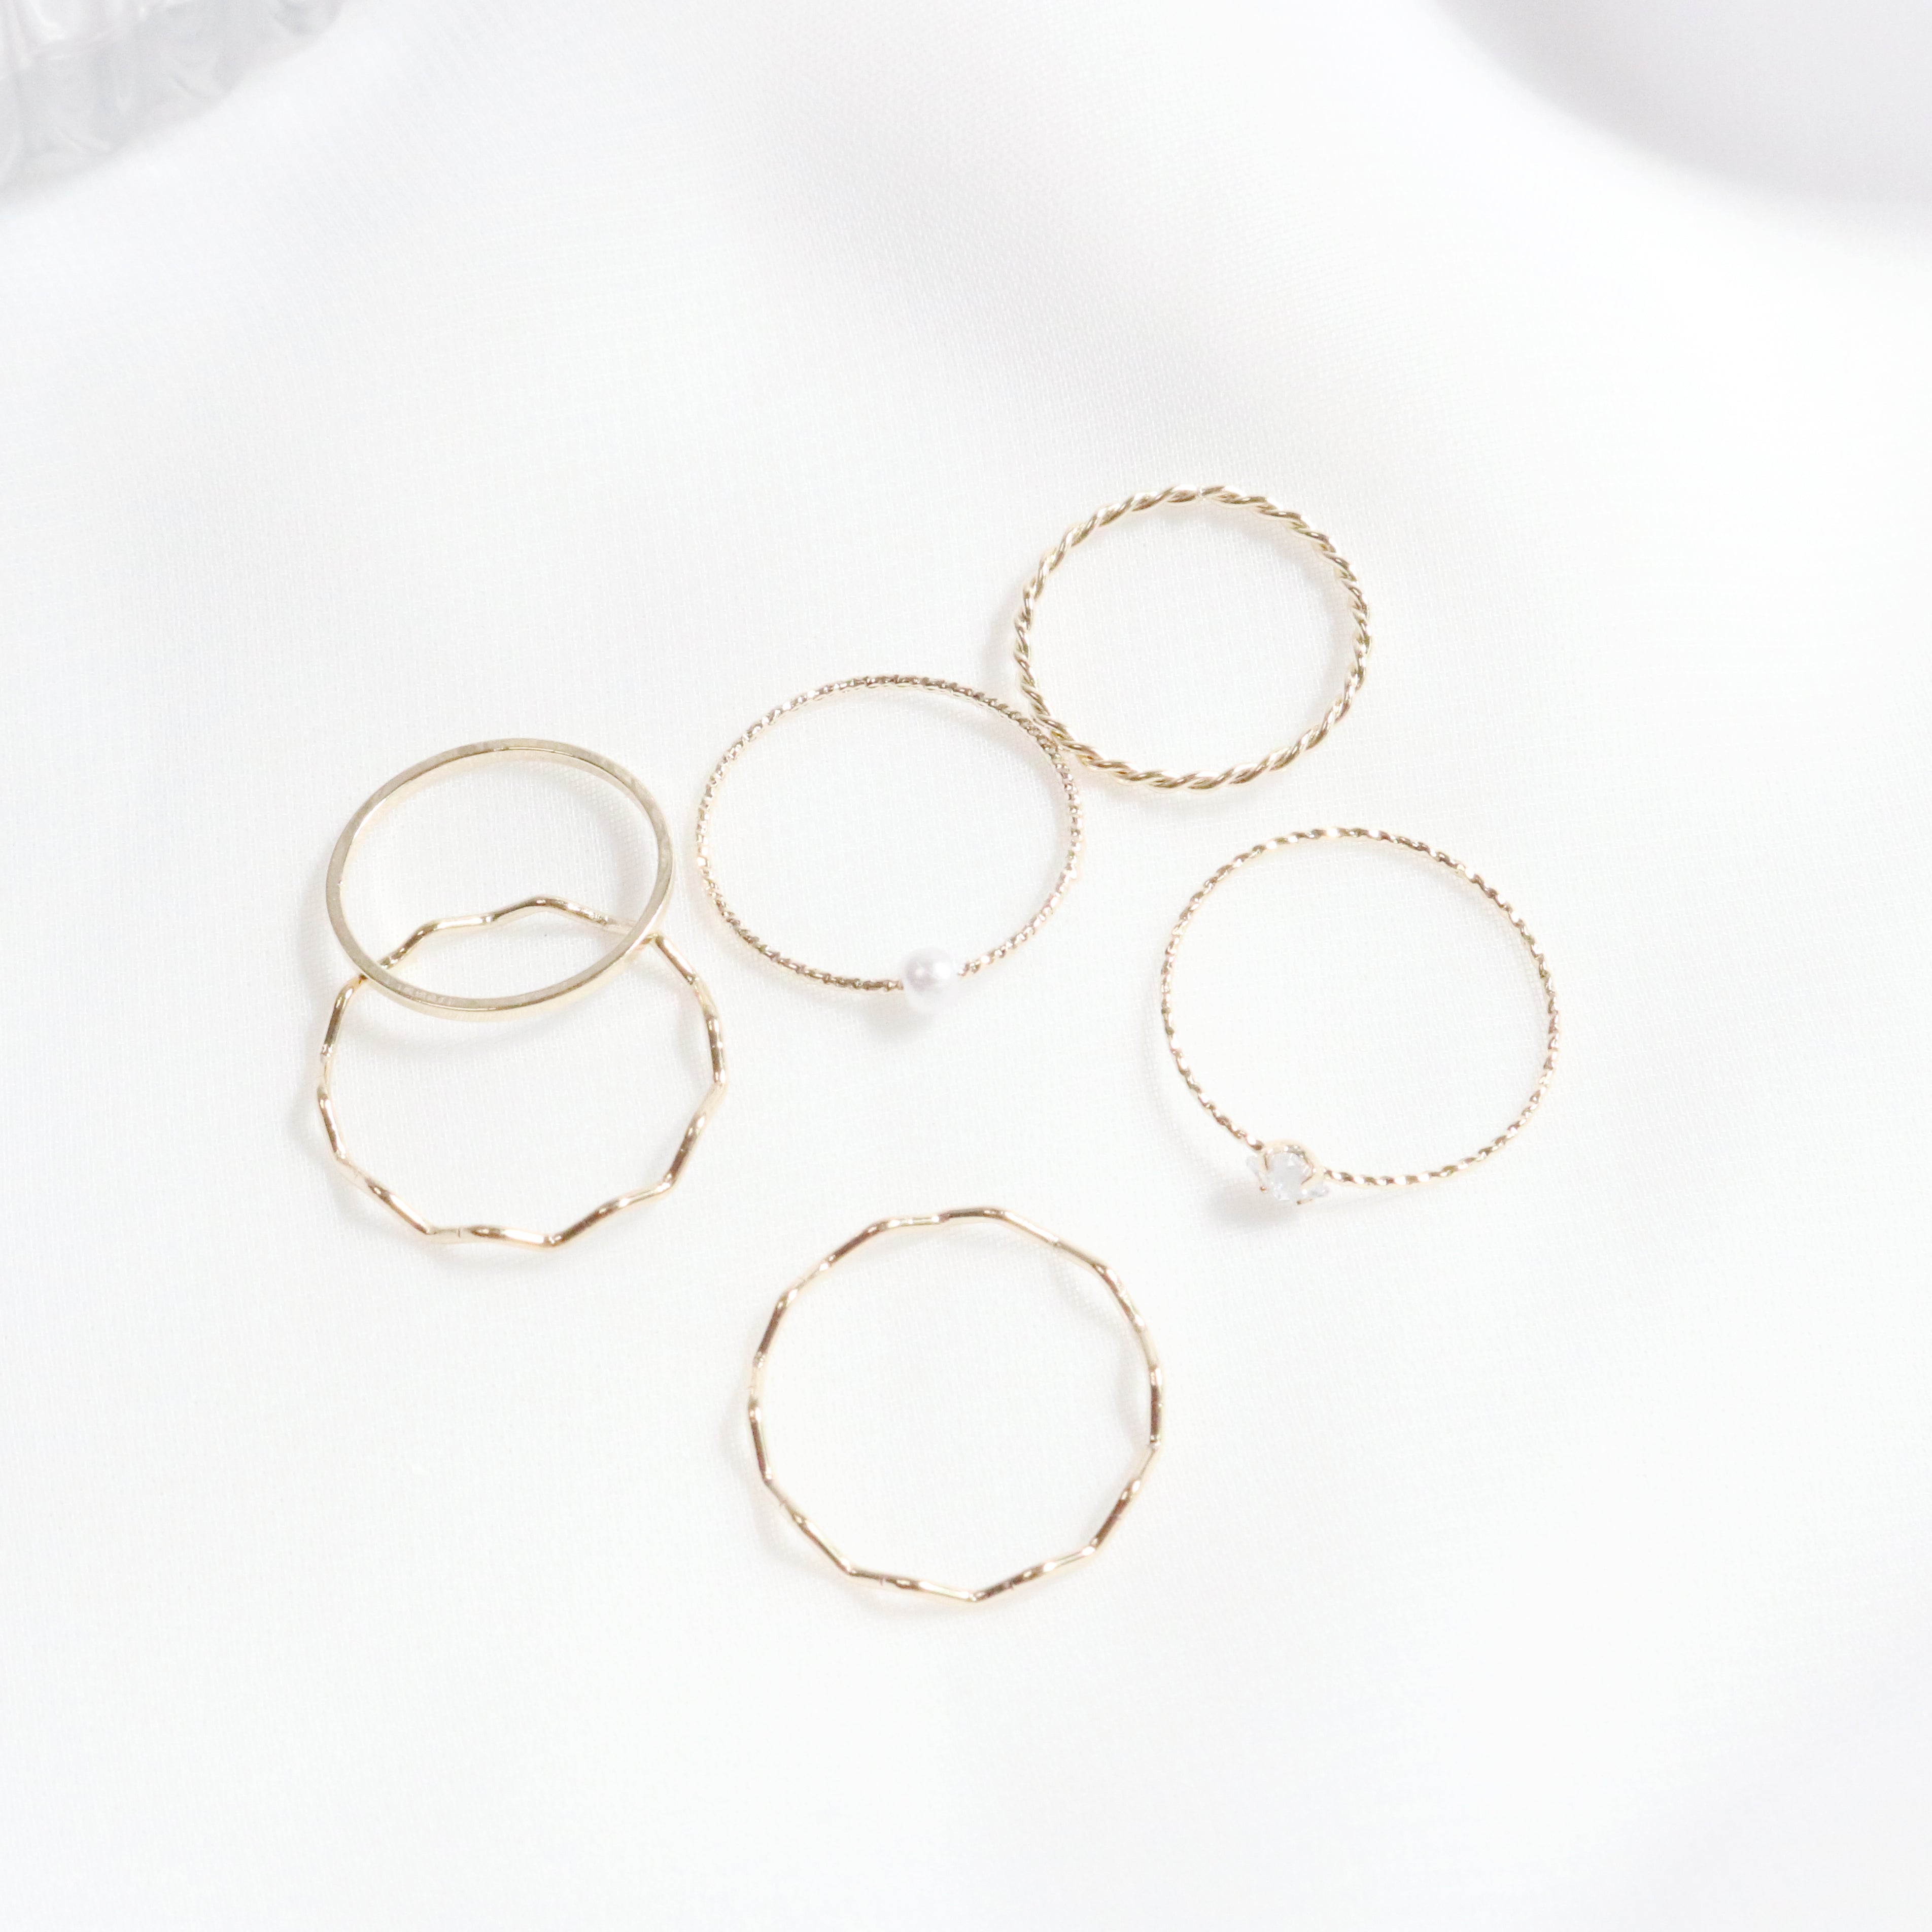 Daily layered ring 6 set (2 color)